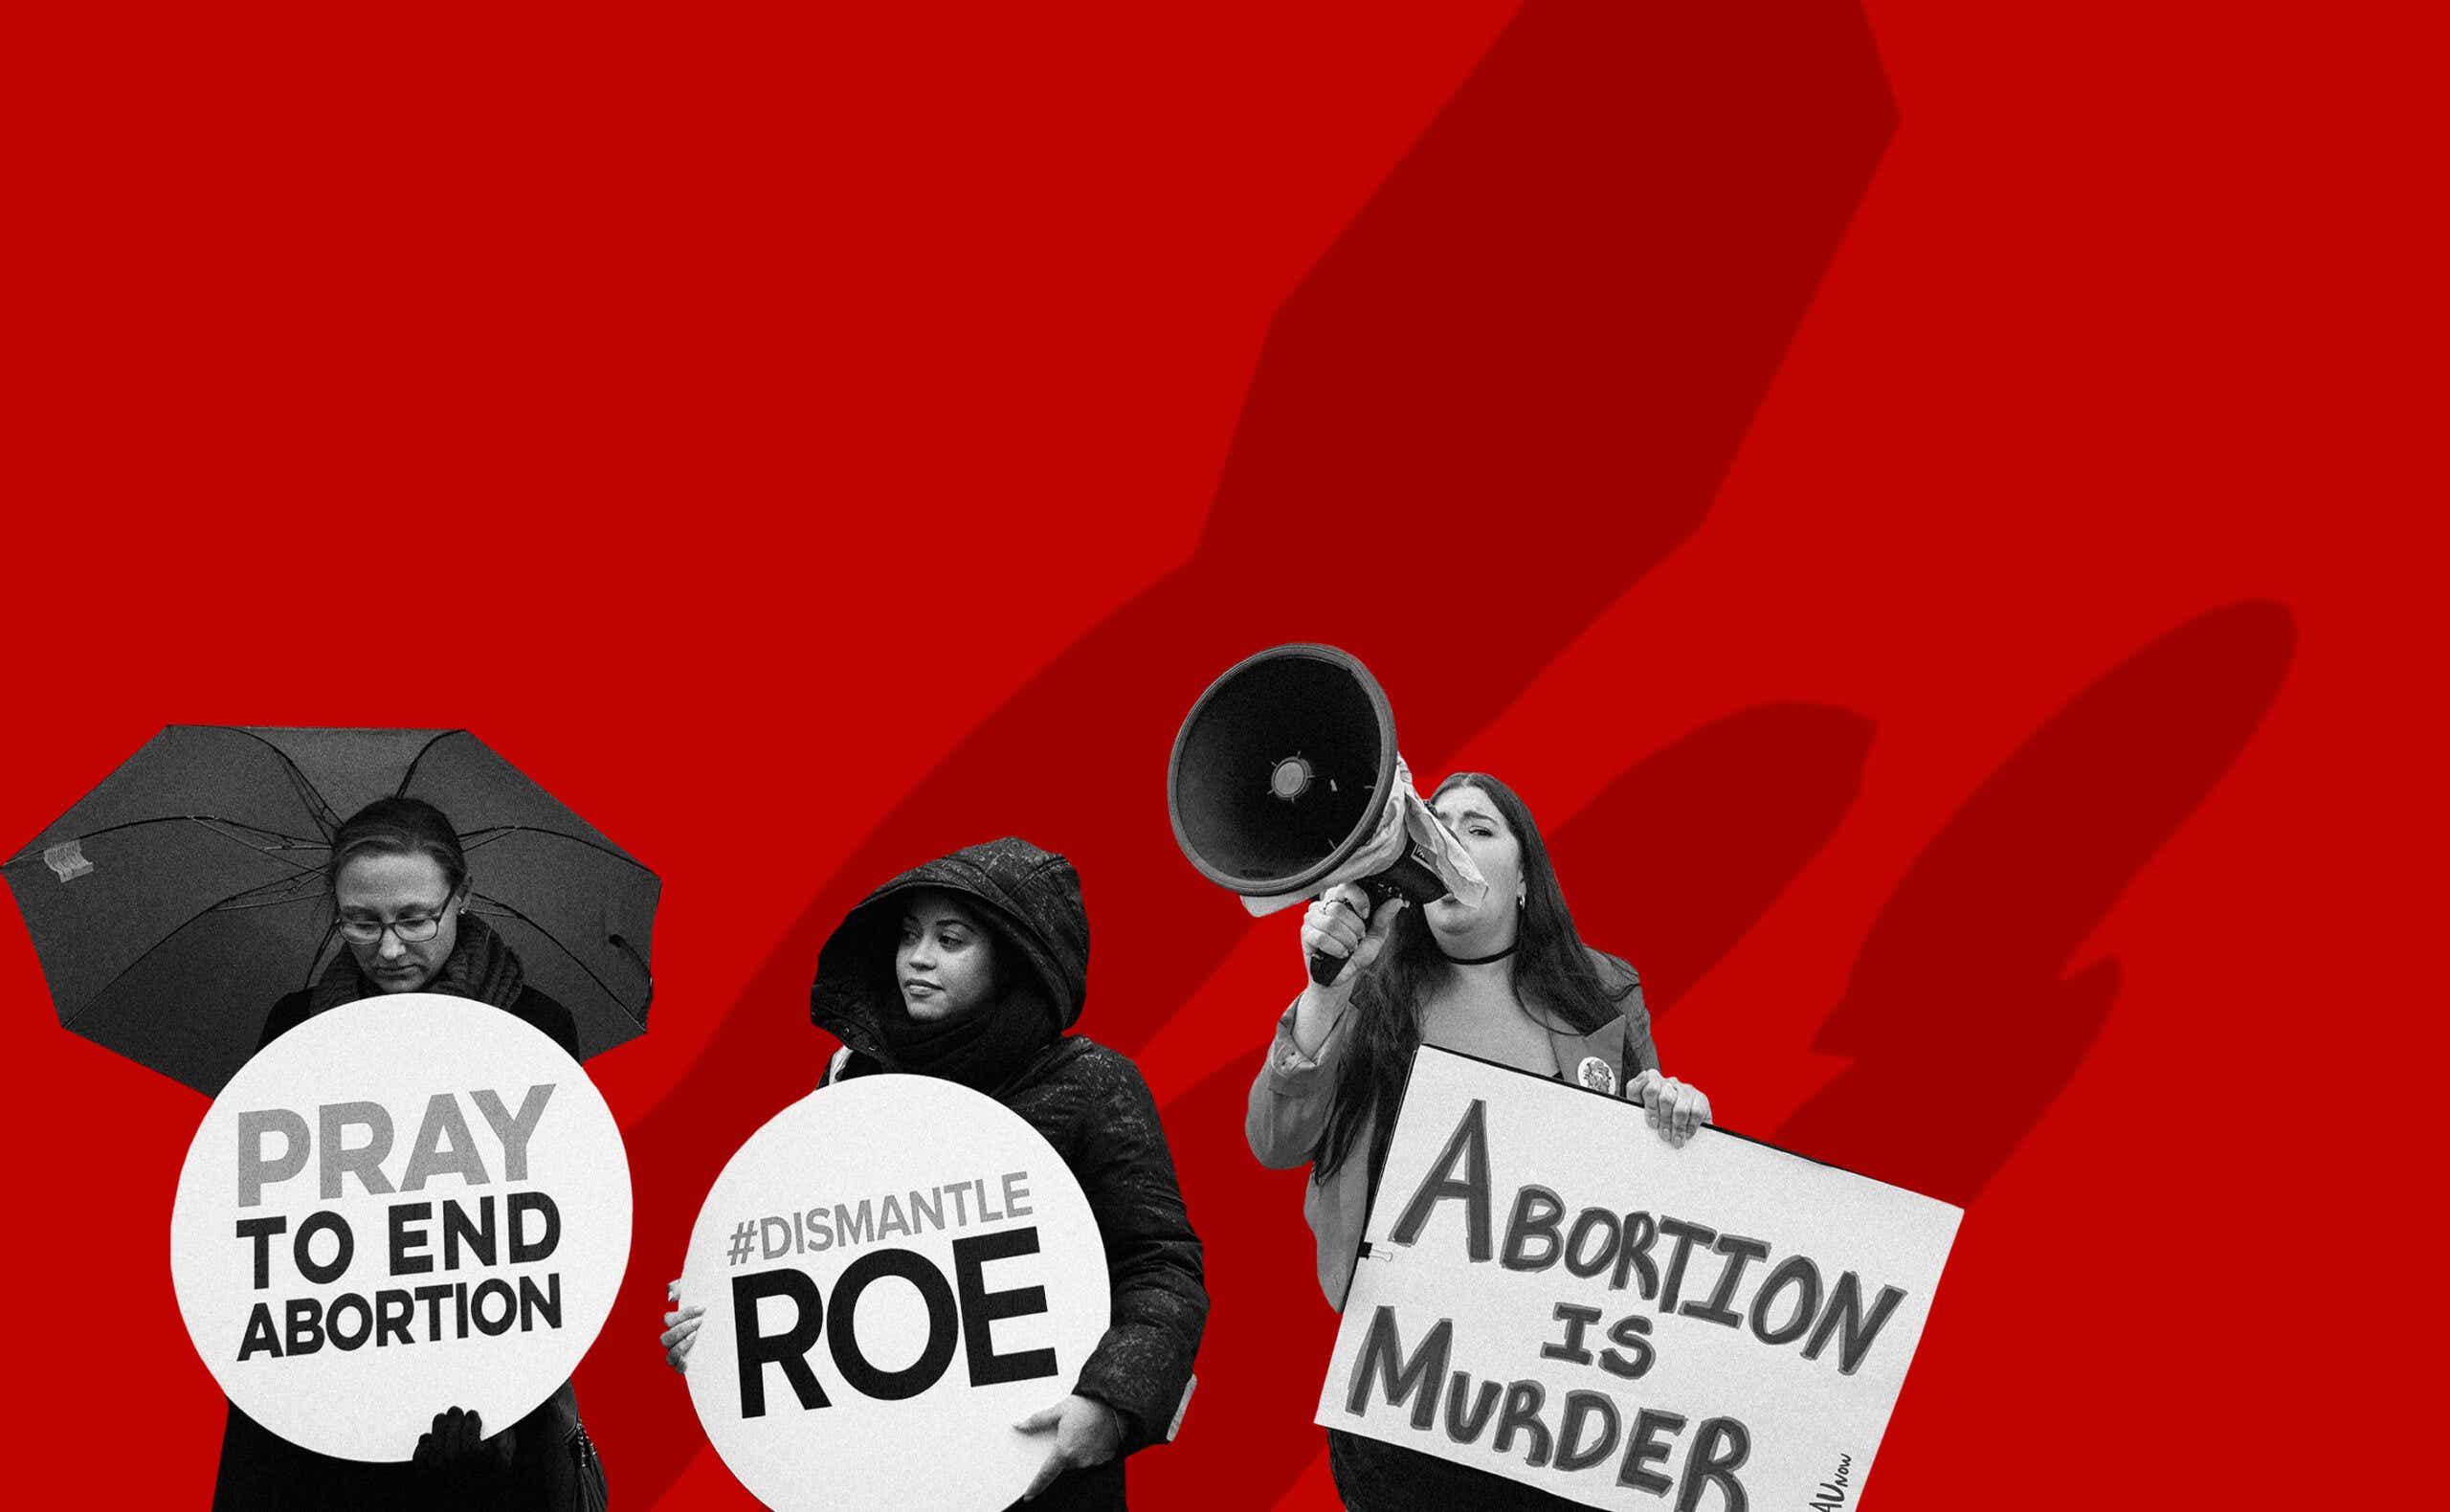 Abortion protestors on red background